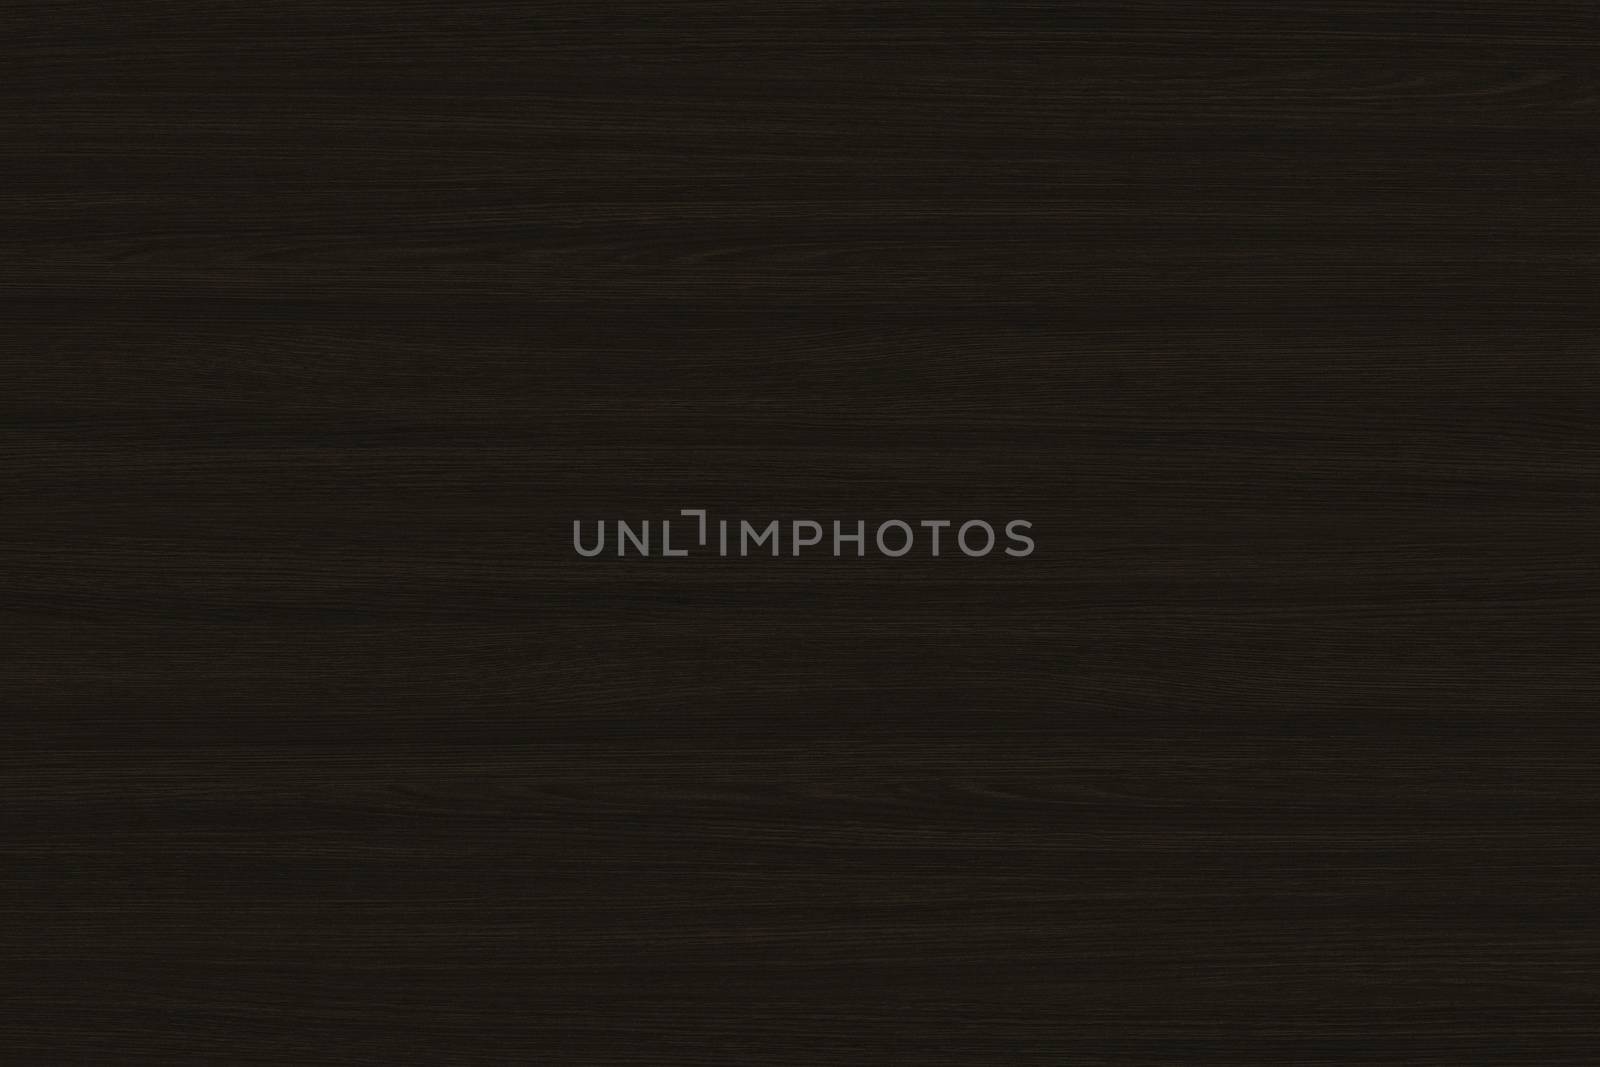 Black wood texture. Background old panels. Wooden texture